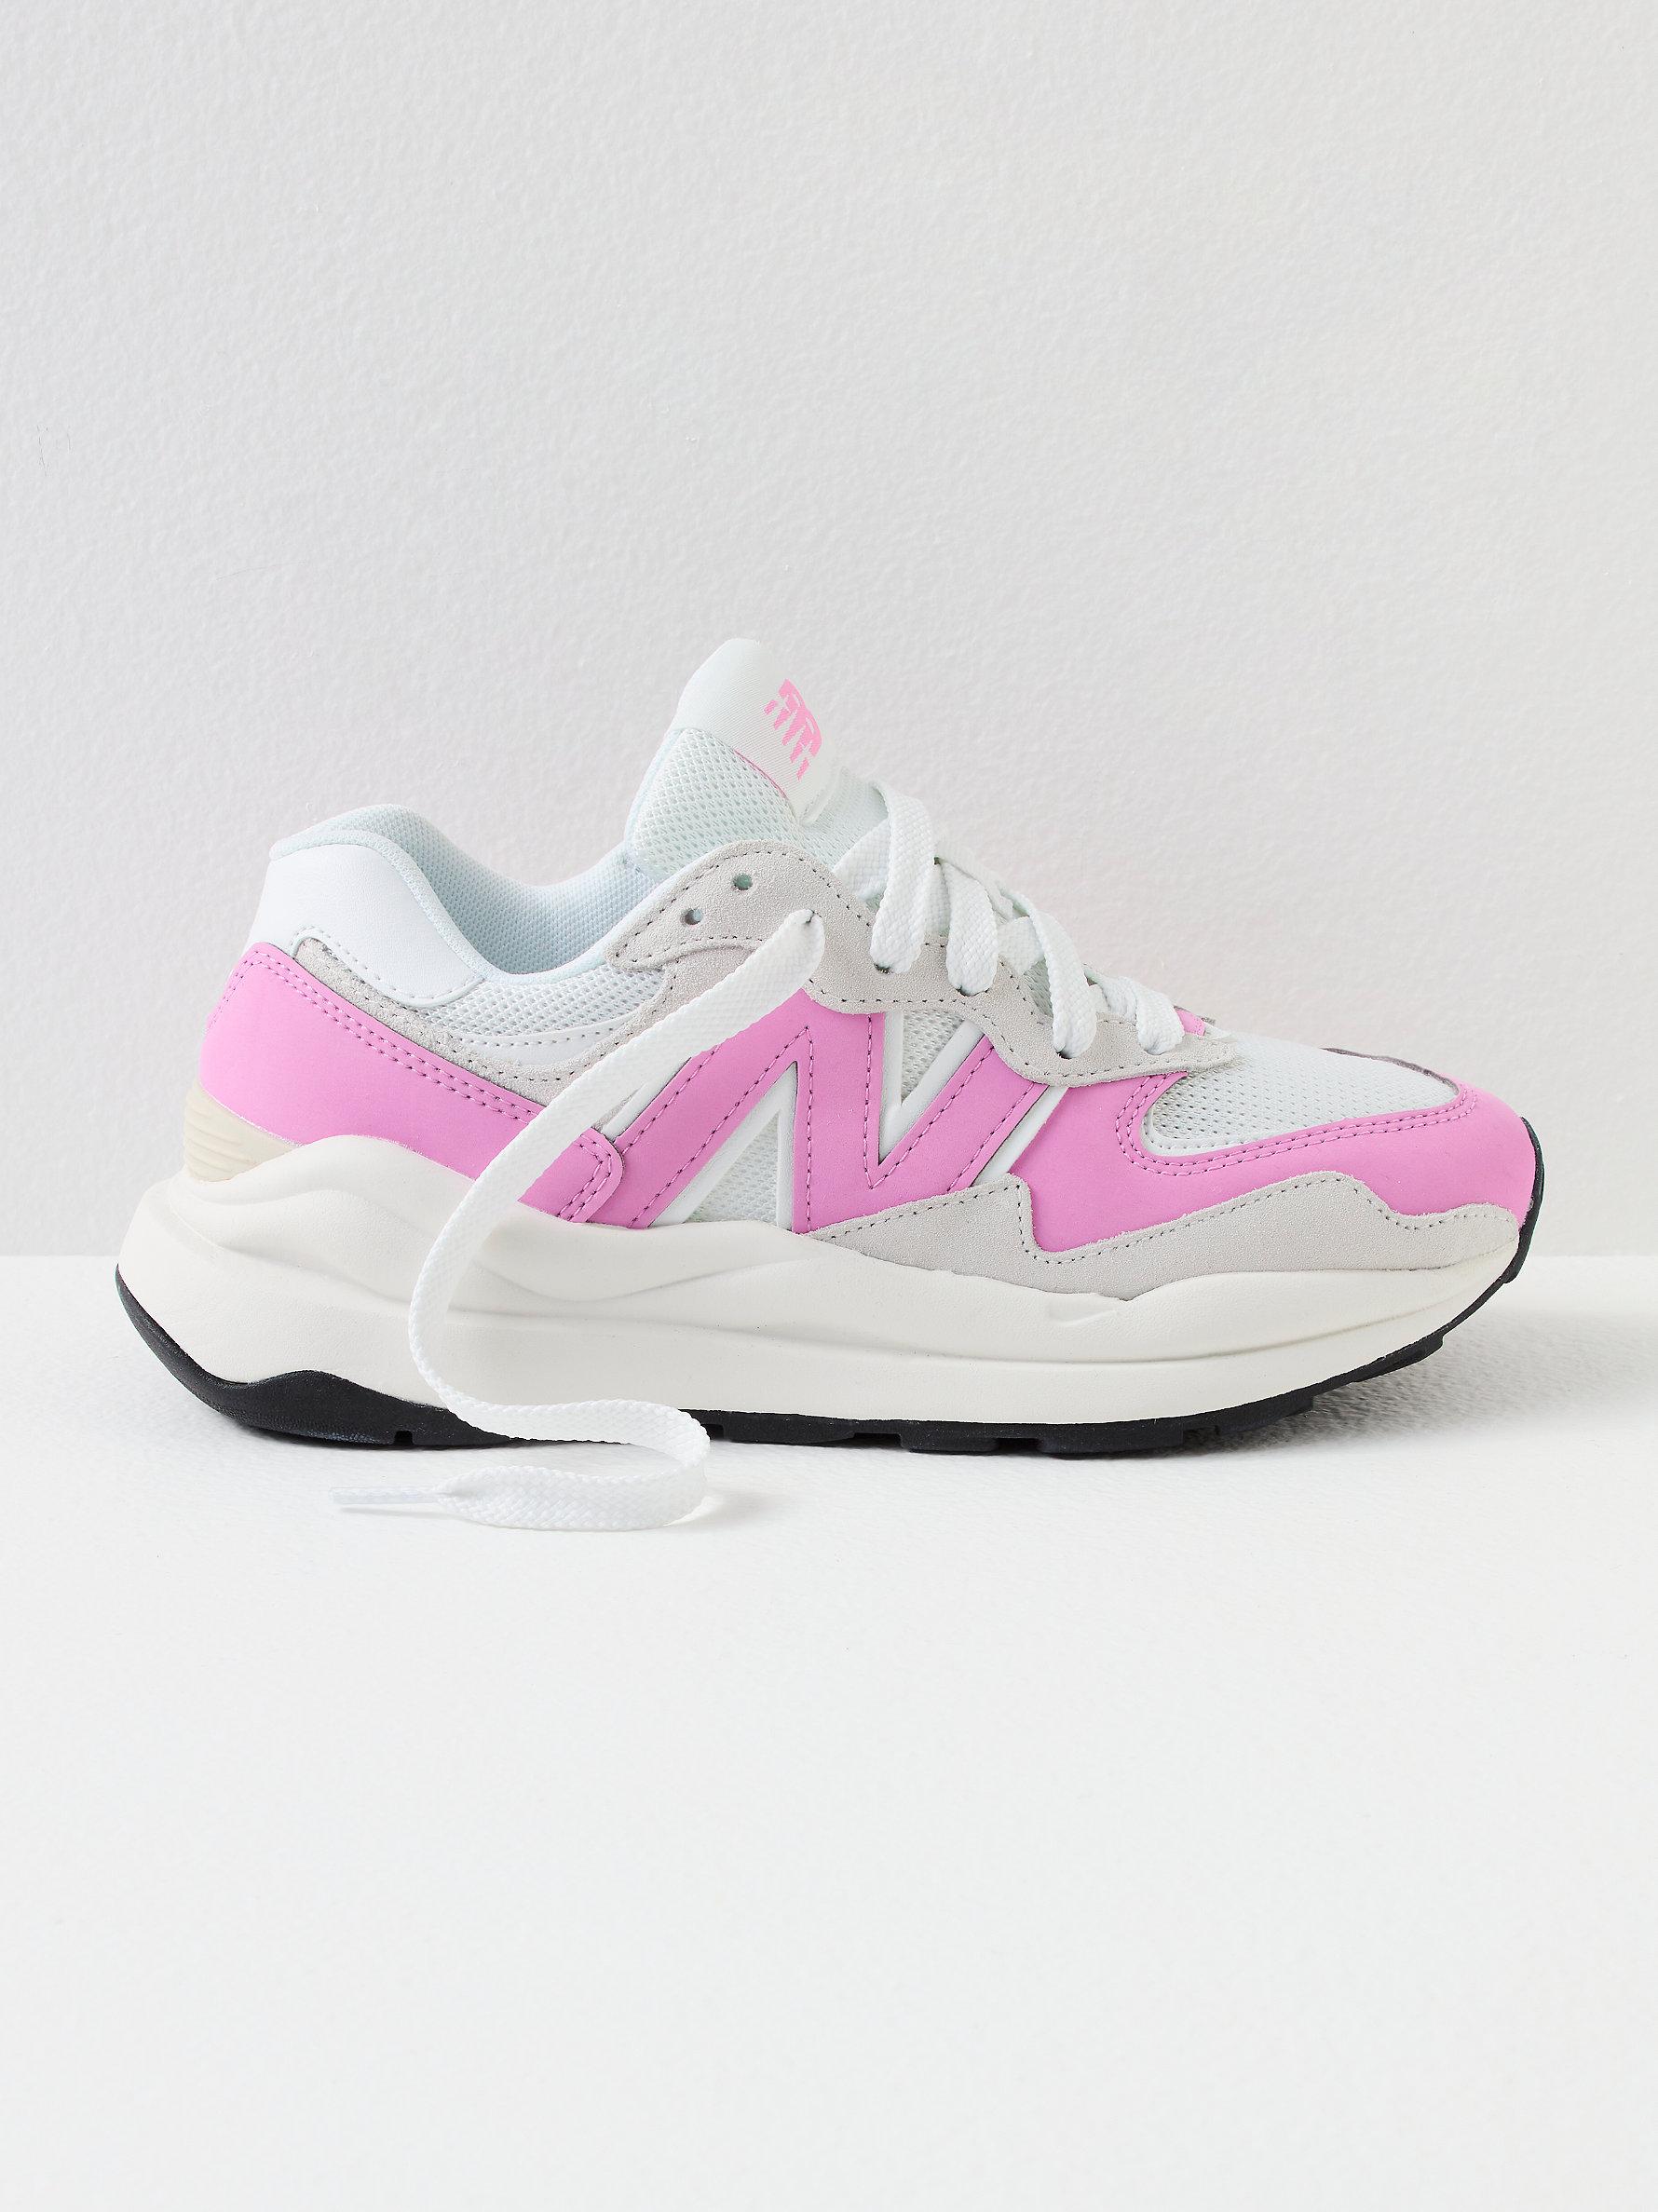 Free People New Balance 57/40 Sneakers in Pink | Lyst